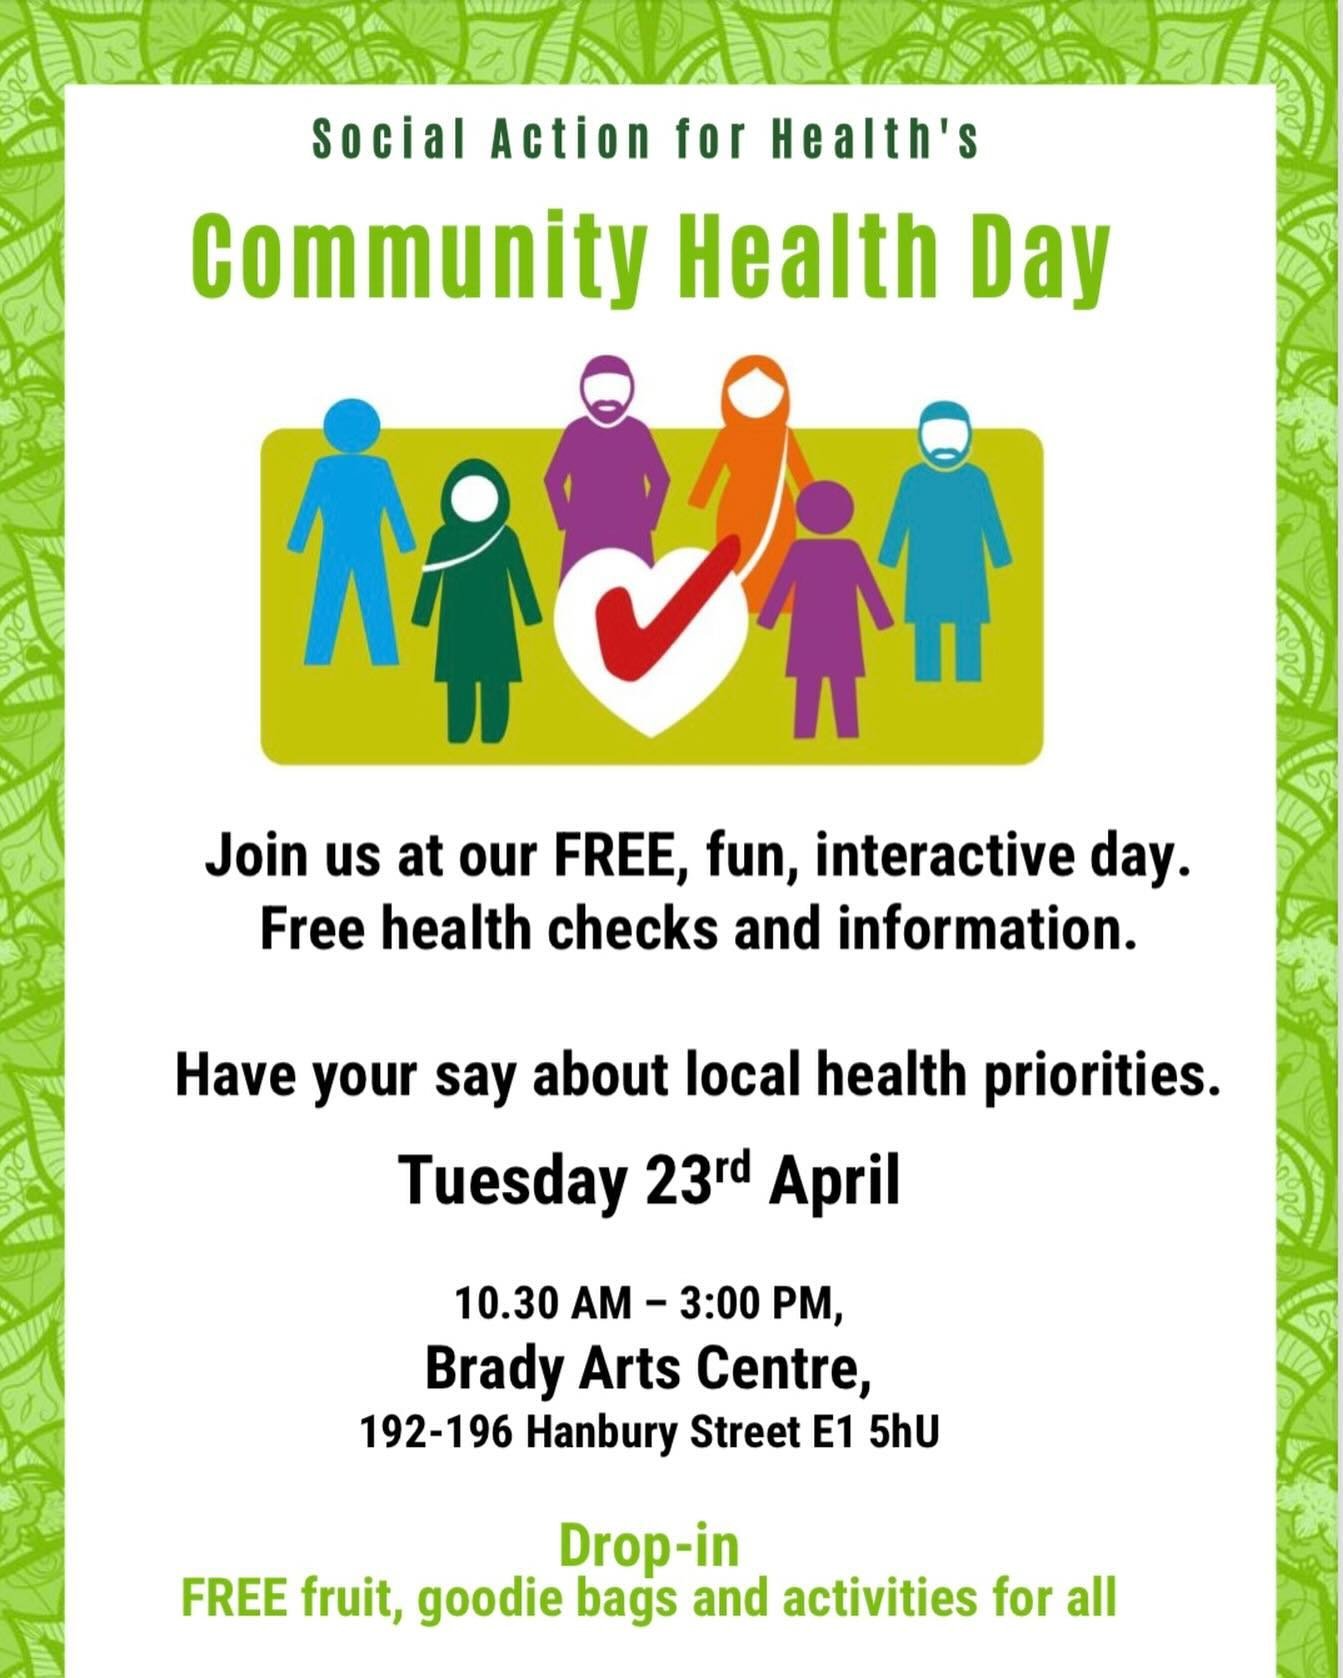 We are hosting a community health day! 🥳

Join us at our FREE, fun, interactive health day at Brady Arts Centre, Hanbury Street, E1 5HU. 10:30am &ndash; 3pm.

🤩 Drop in! 
💷 FREE!
Physical health checks and information: 
❤️blood pressure, 
📈blood 